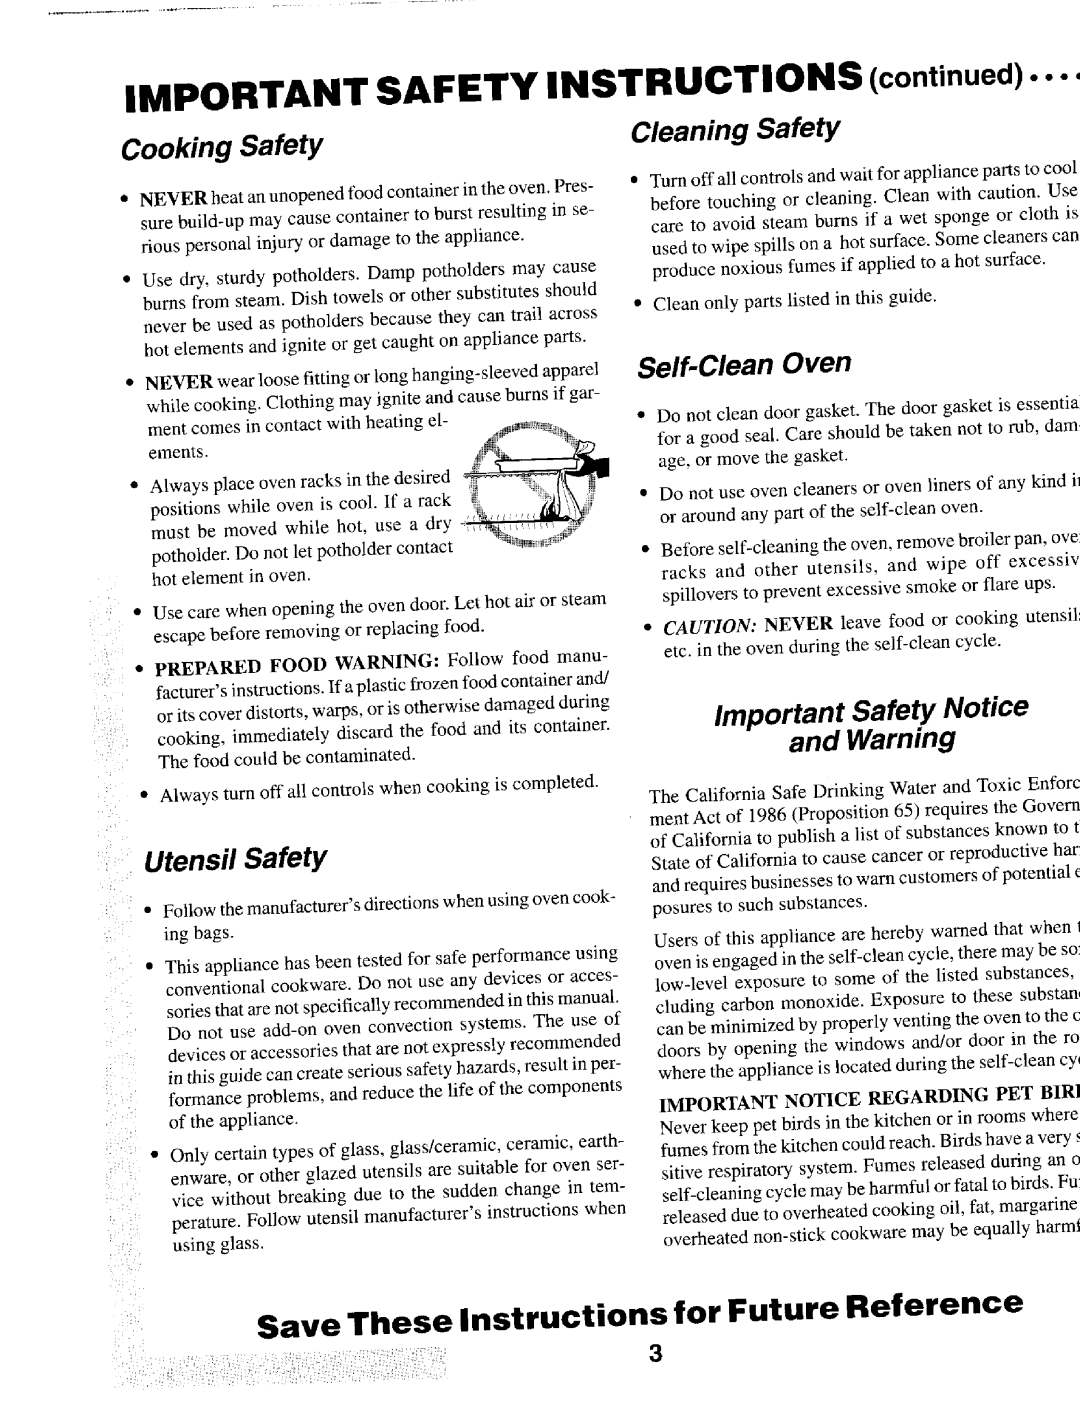 Maytag IEW621 manual IMPORTANT SAFETY INSTRUCTIONS continued, Cooking Safety, Cleaning Safety, Self-CleanOven, and Warning 